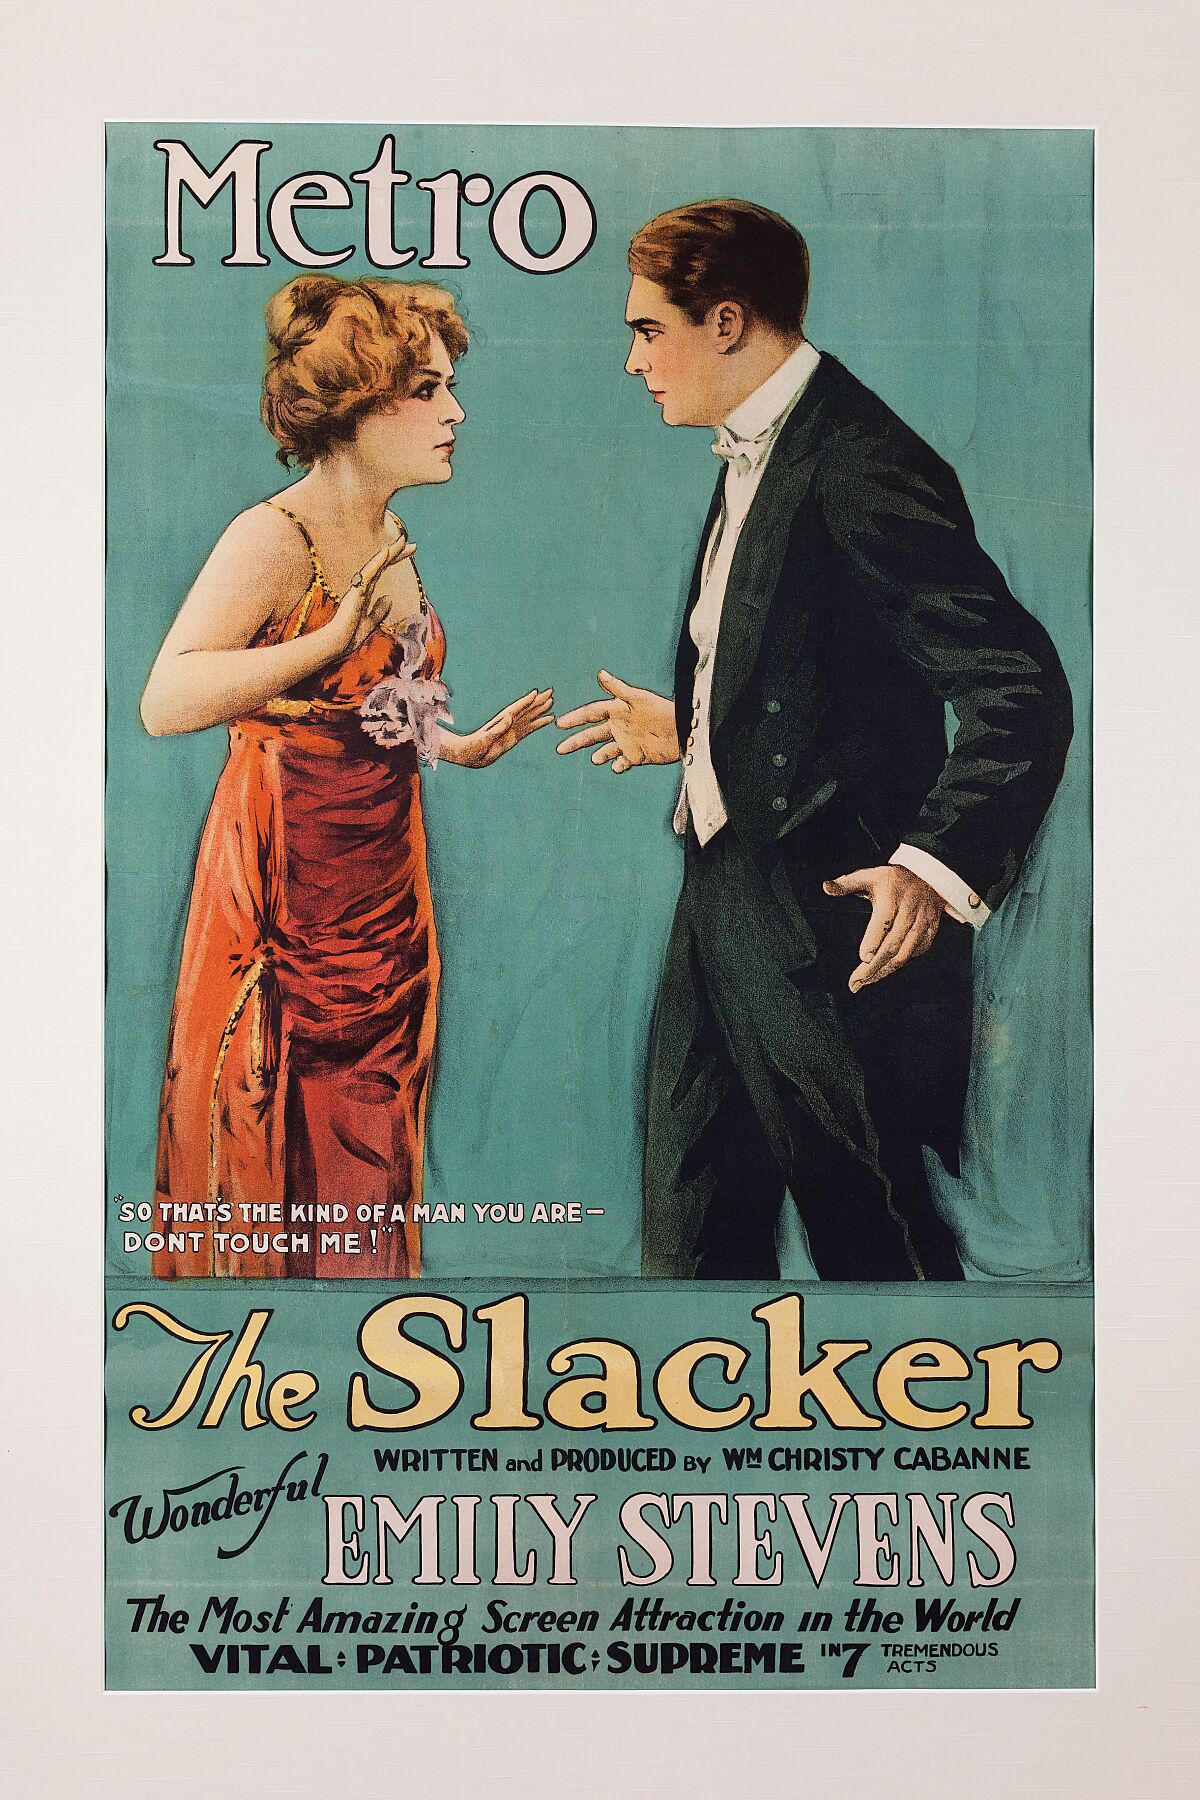 The Slacker directed by Christy Cabanne with Emily Stevens - 1917